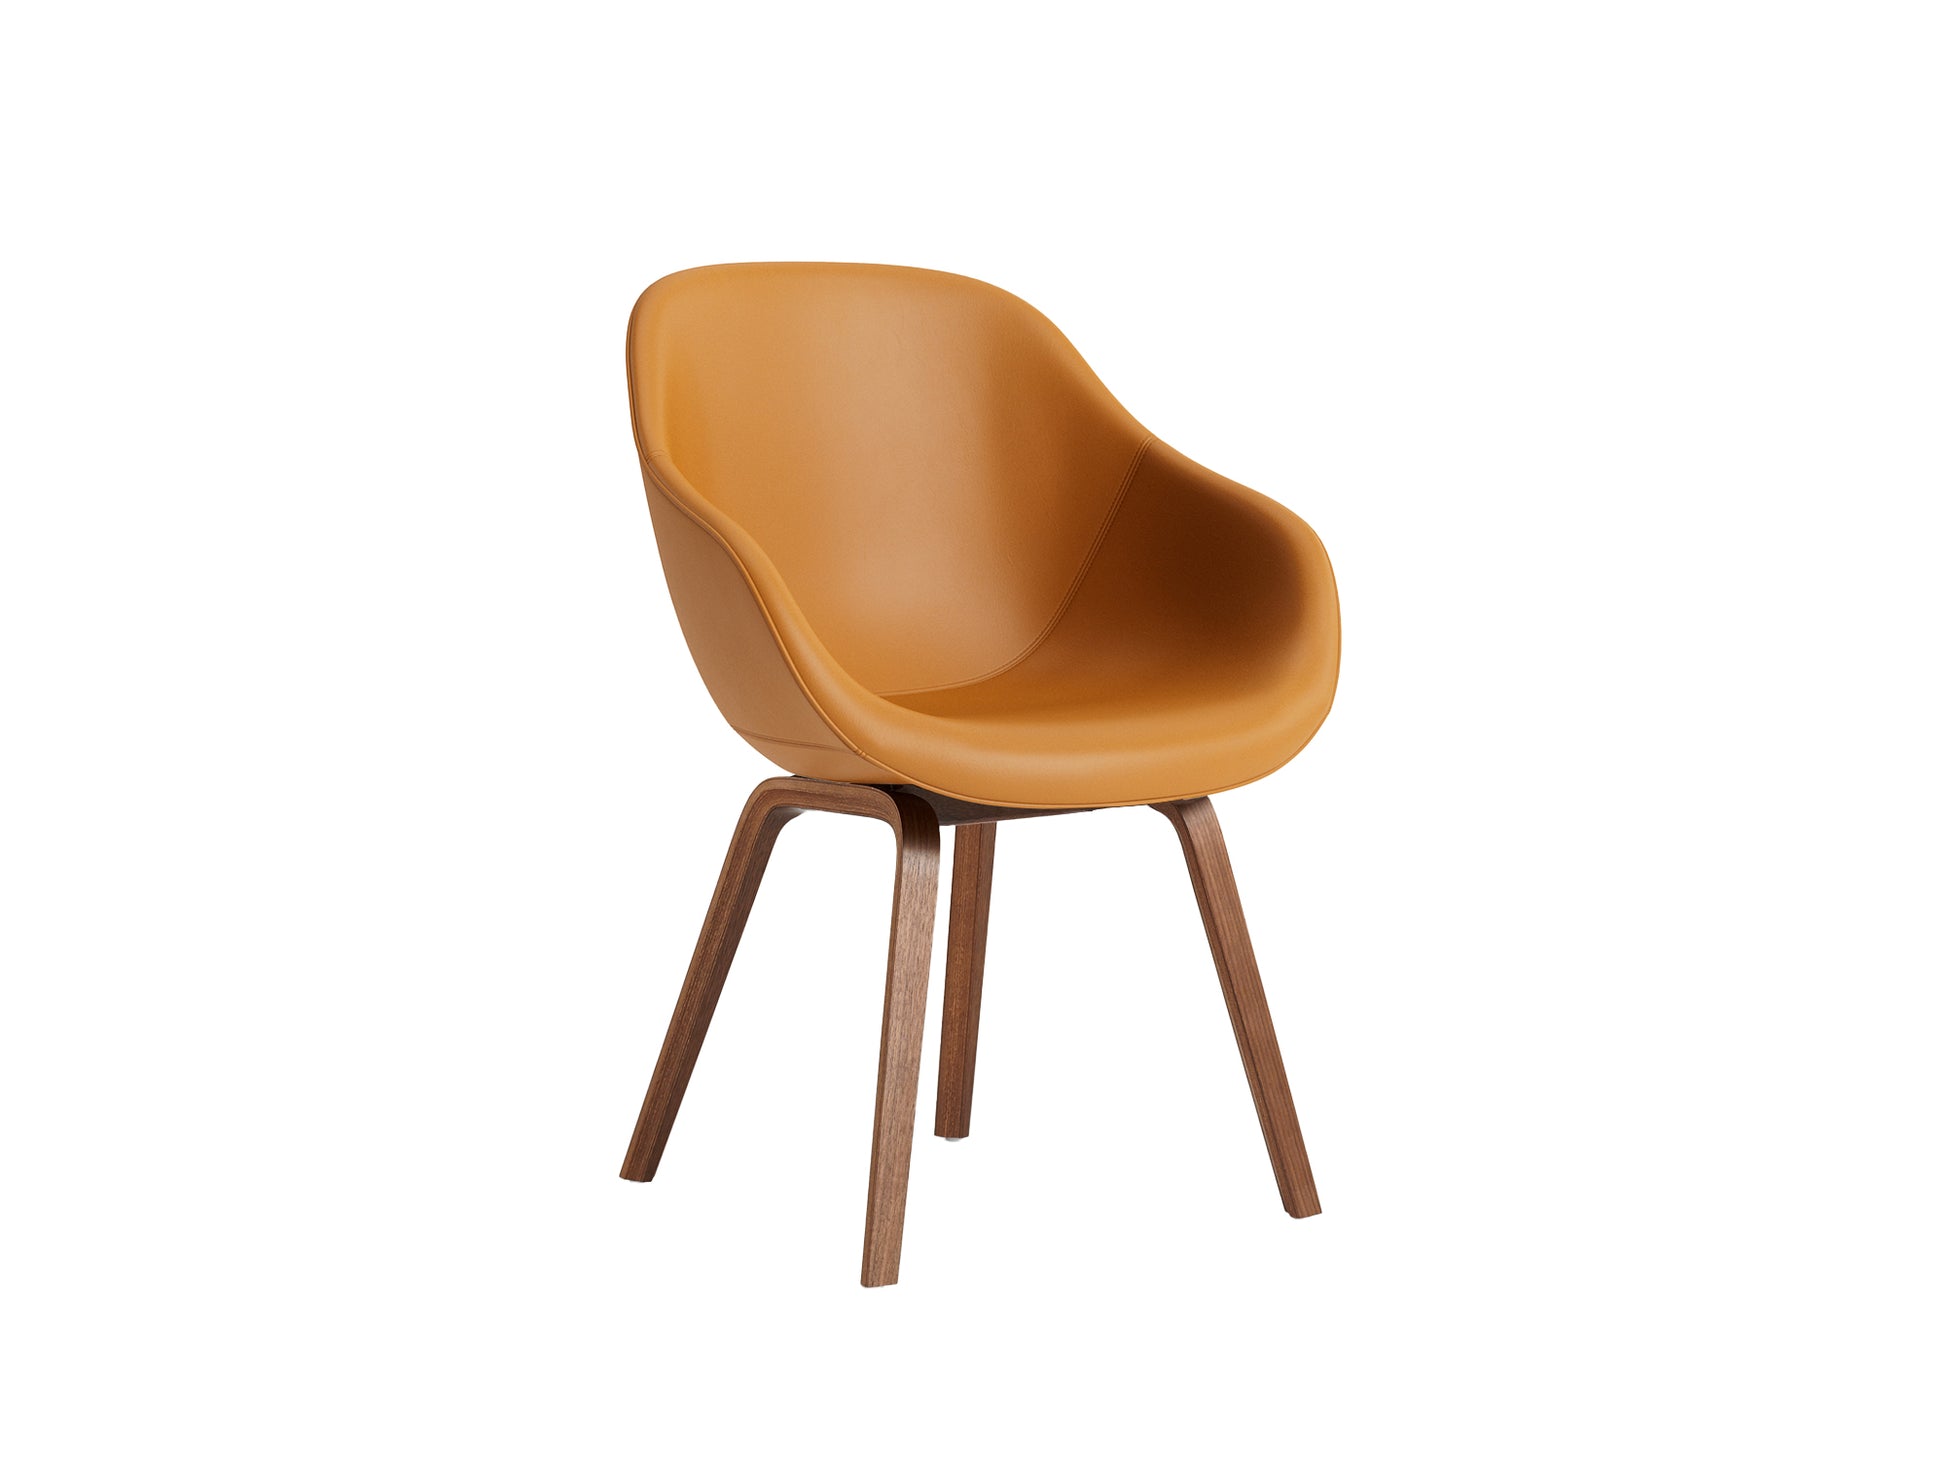 About A Chair AAC 123 by HAY - Sense Cognac Leather / Lacquered Walnut Base